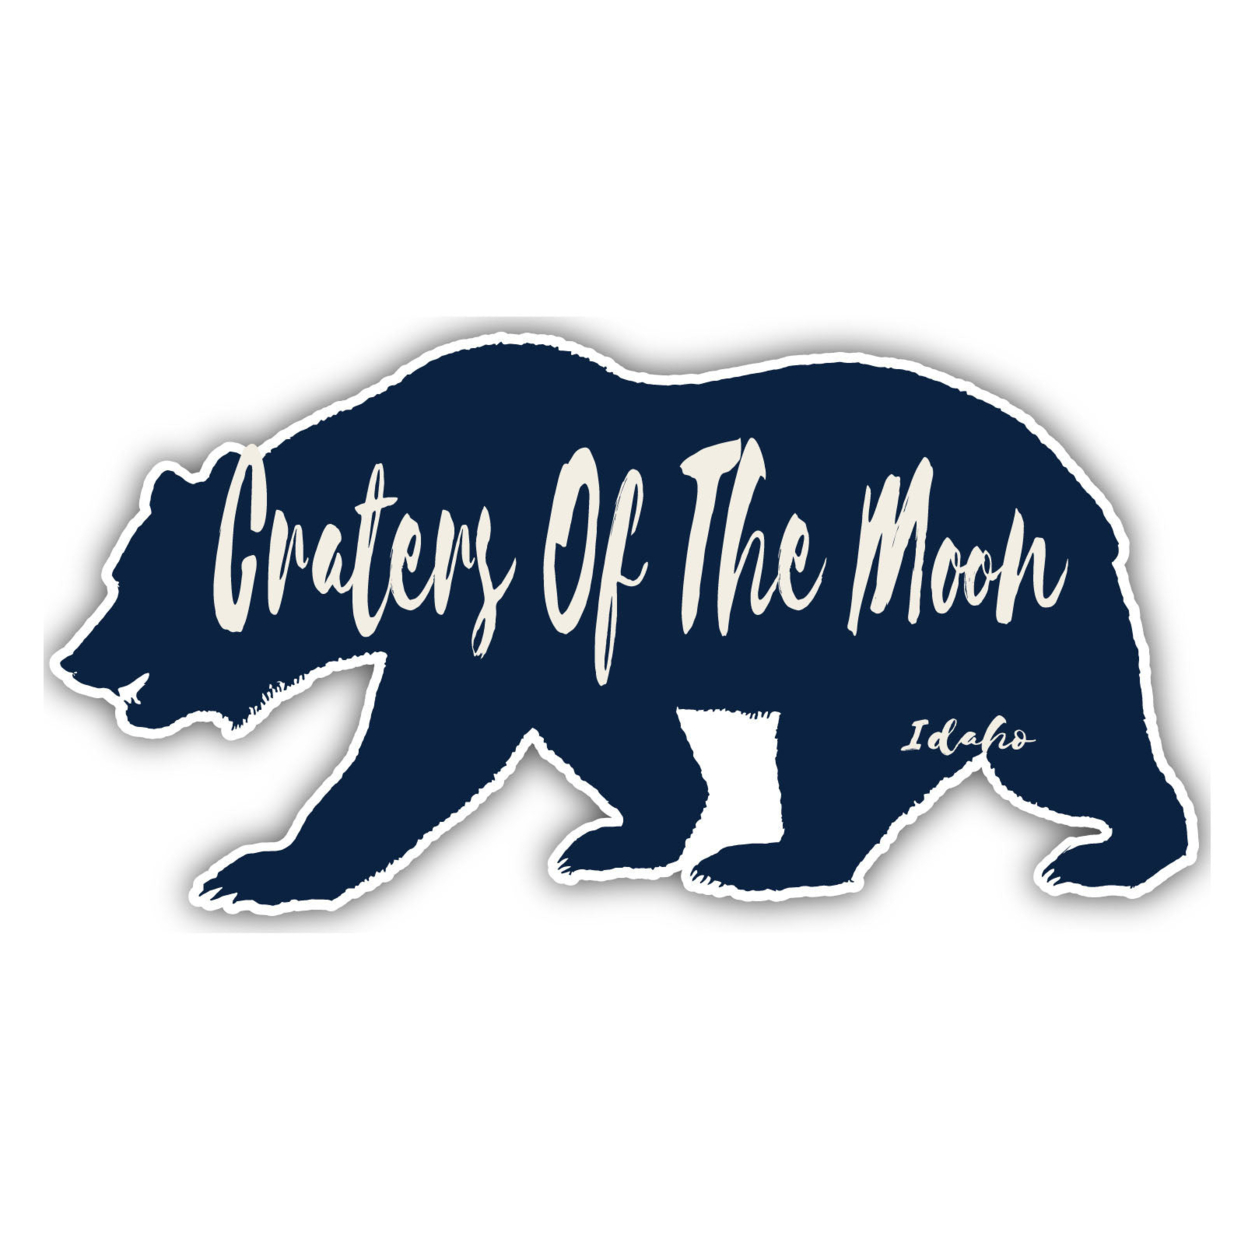 Craters Of The Moon Idaho Souvenir Decorative Stickers (Choose Theme And Size) - 4-Pack, 10-Inch, Bear